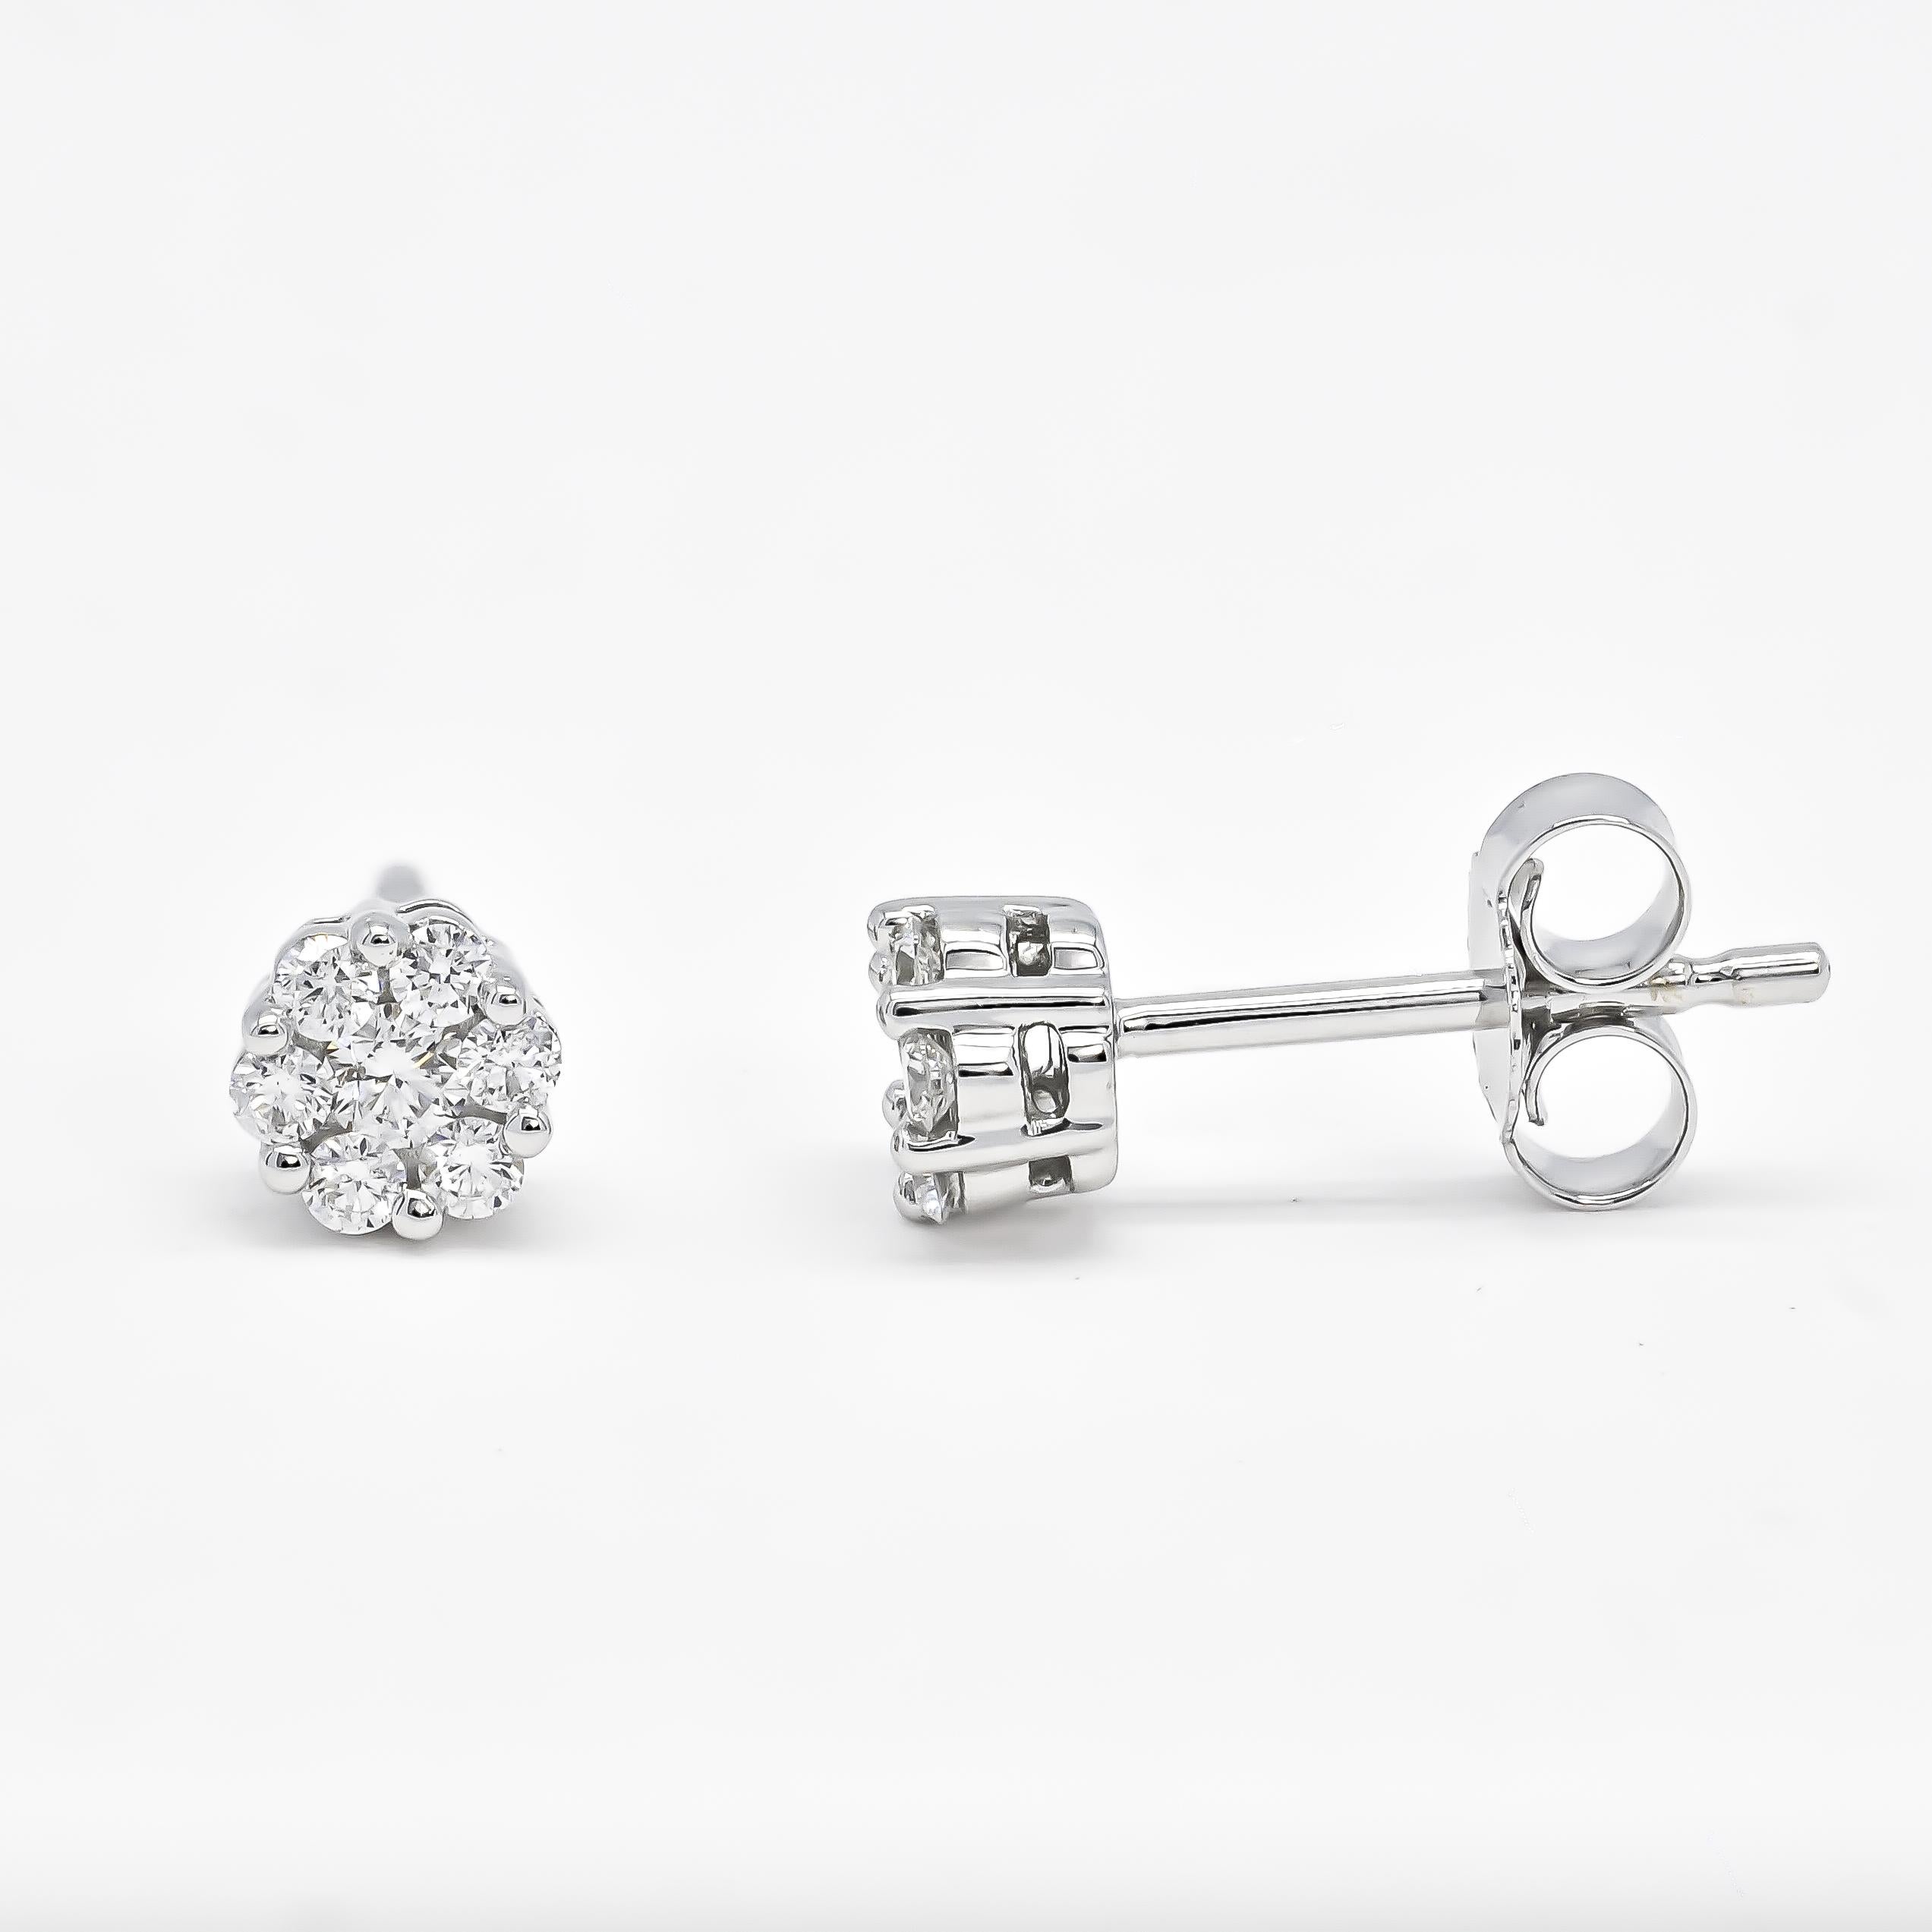 Introducing our exquisite 18ktw Gold Prong Set Classic Cluster Solitaire Natural Diamonds Stud Earrings—a timeless expression of elegance and sophistication, now enhanced with a dazzling total weight of 2.00 carats. Crafted with meticulous attention